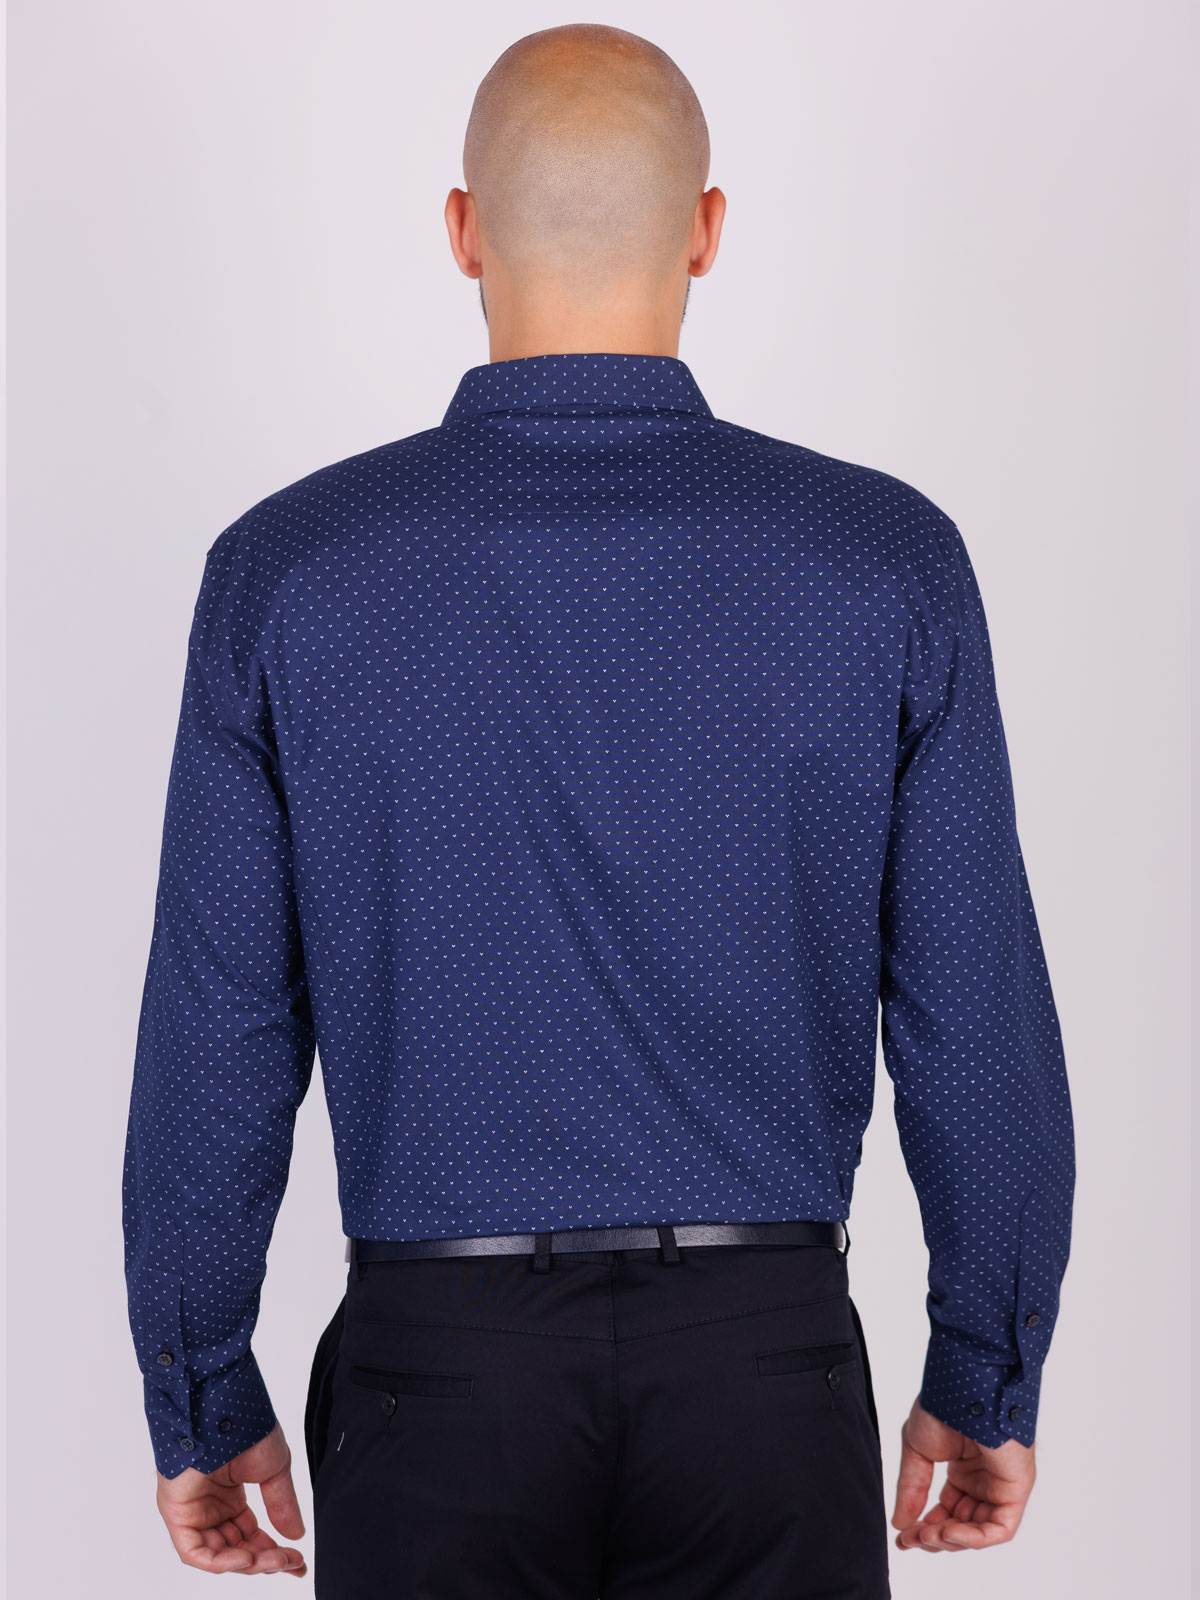 Mens shirt with white figures - 21572 € 44.43 img2